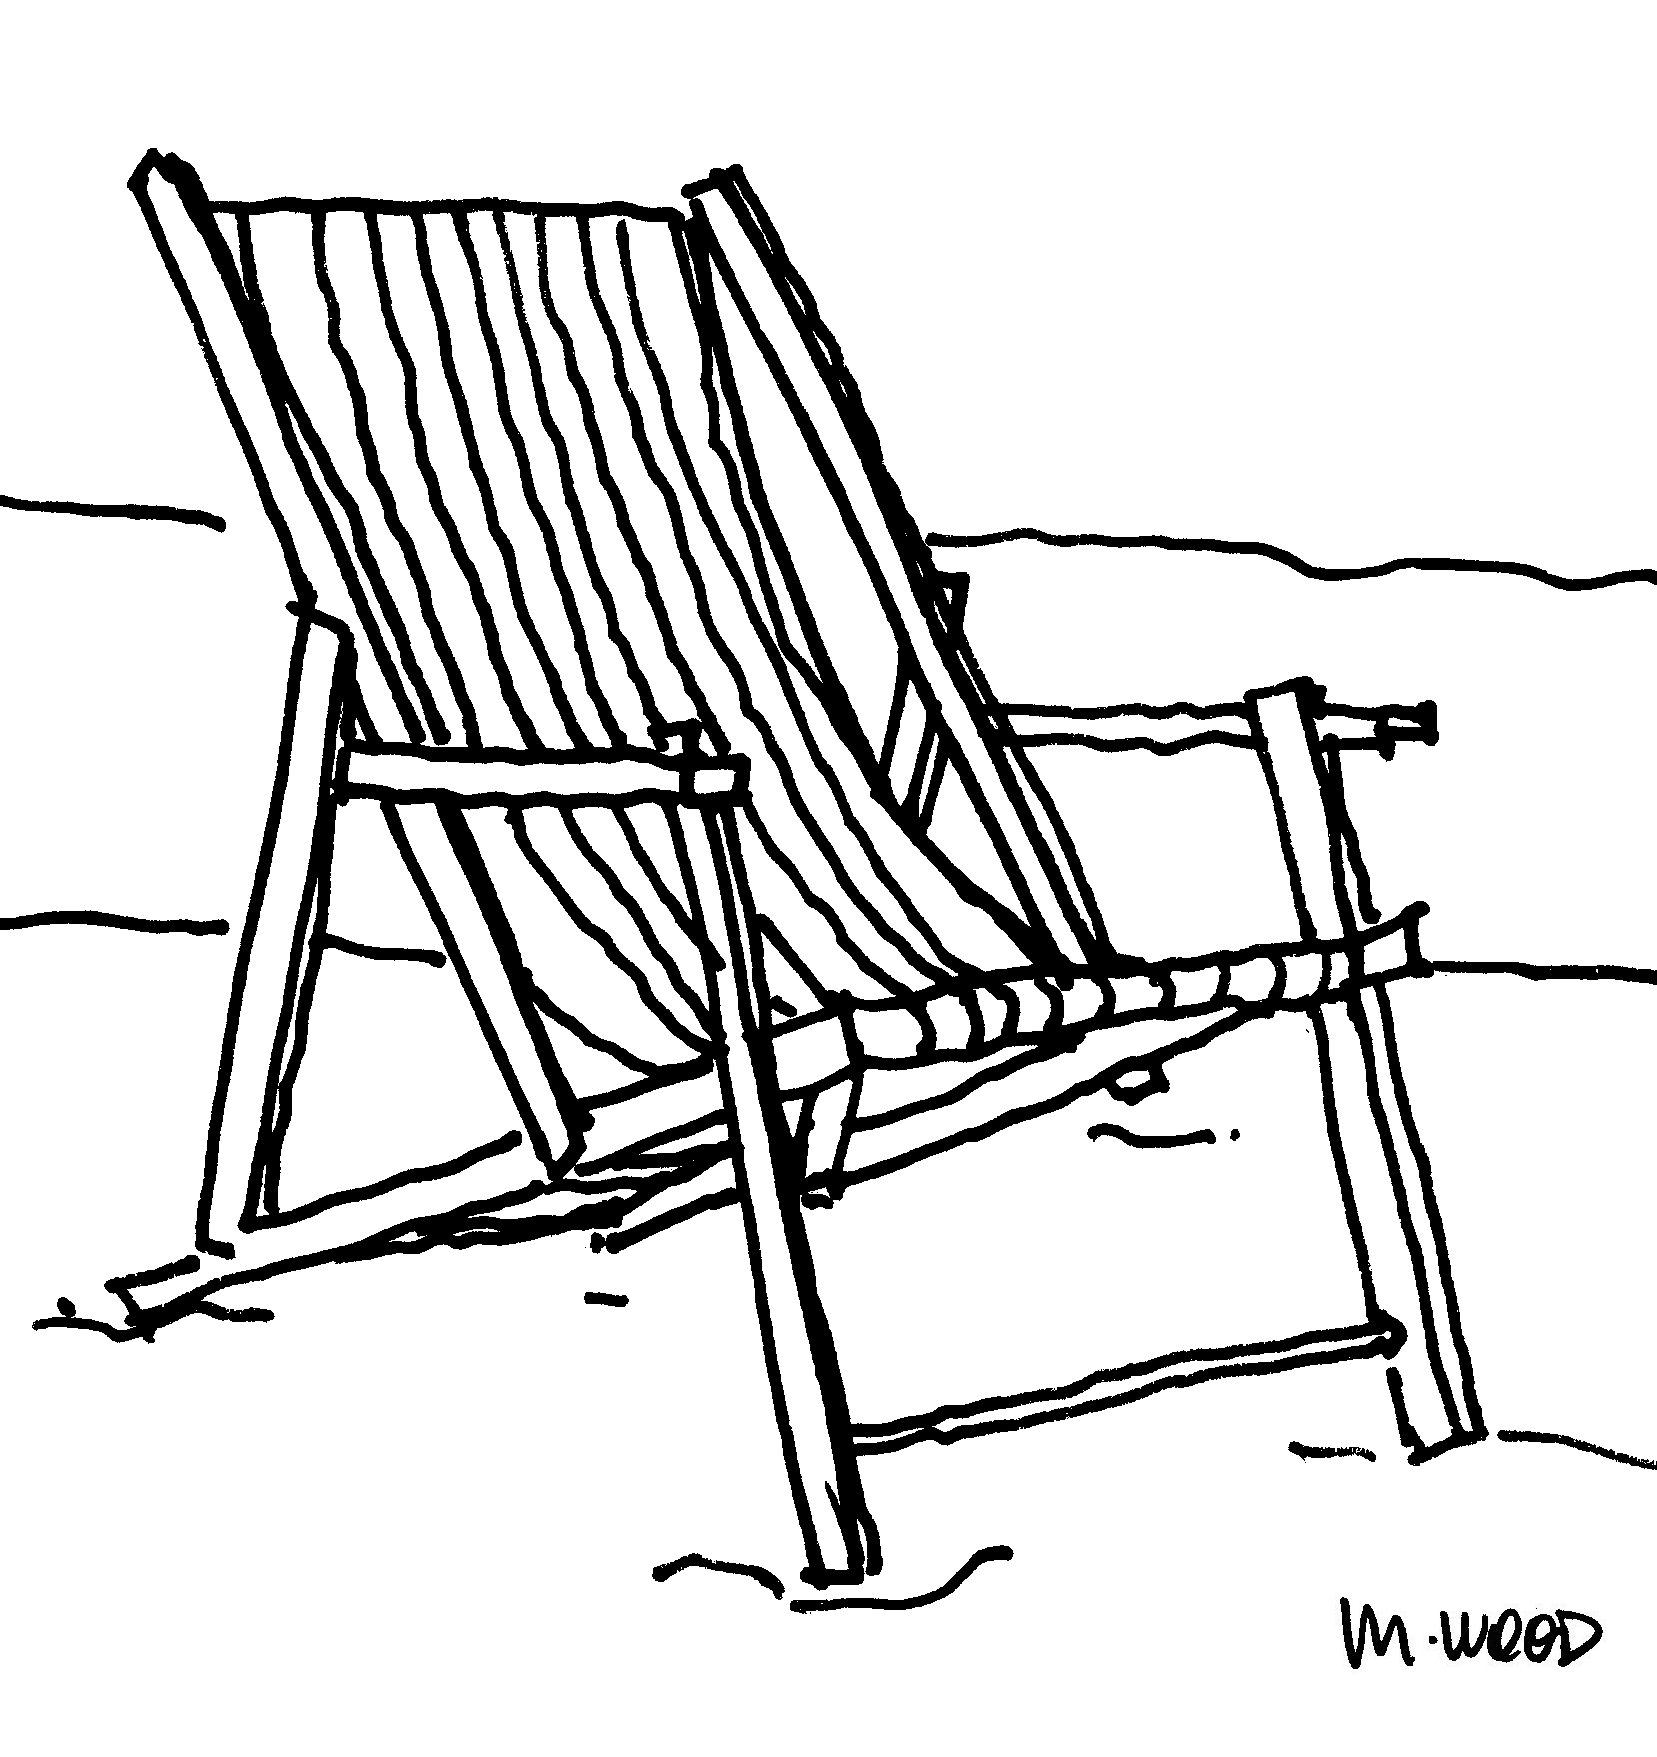 How To Draw A Beach Chair | www.pixshark.com - Images ...